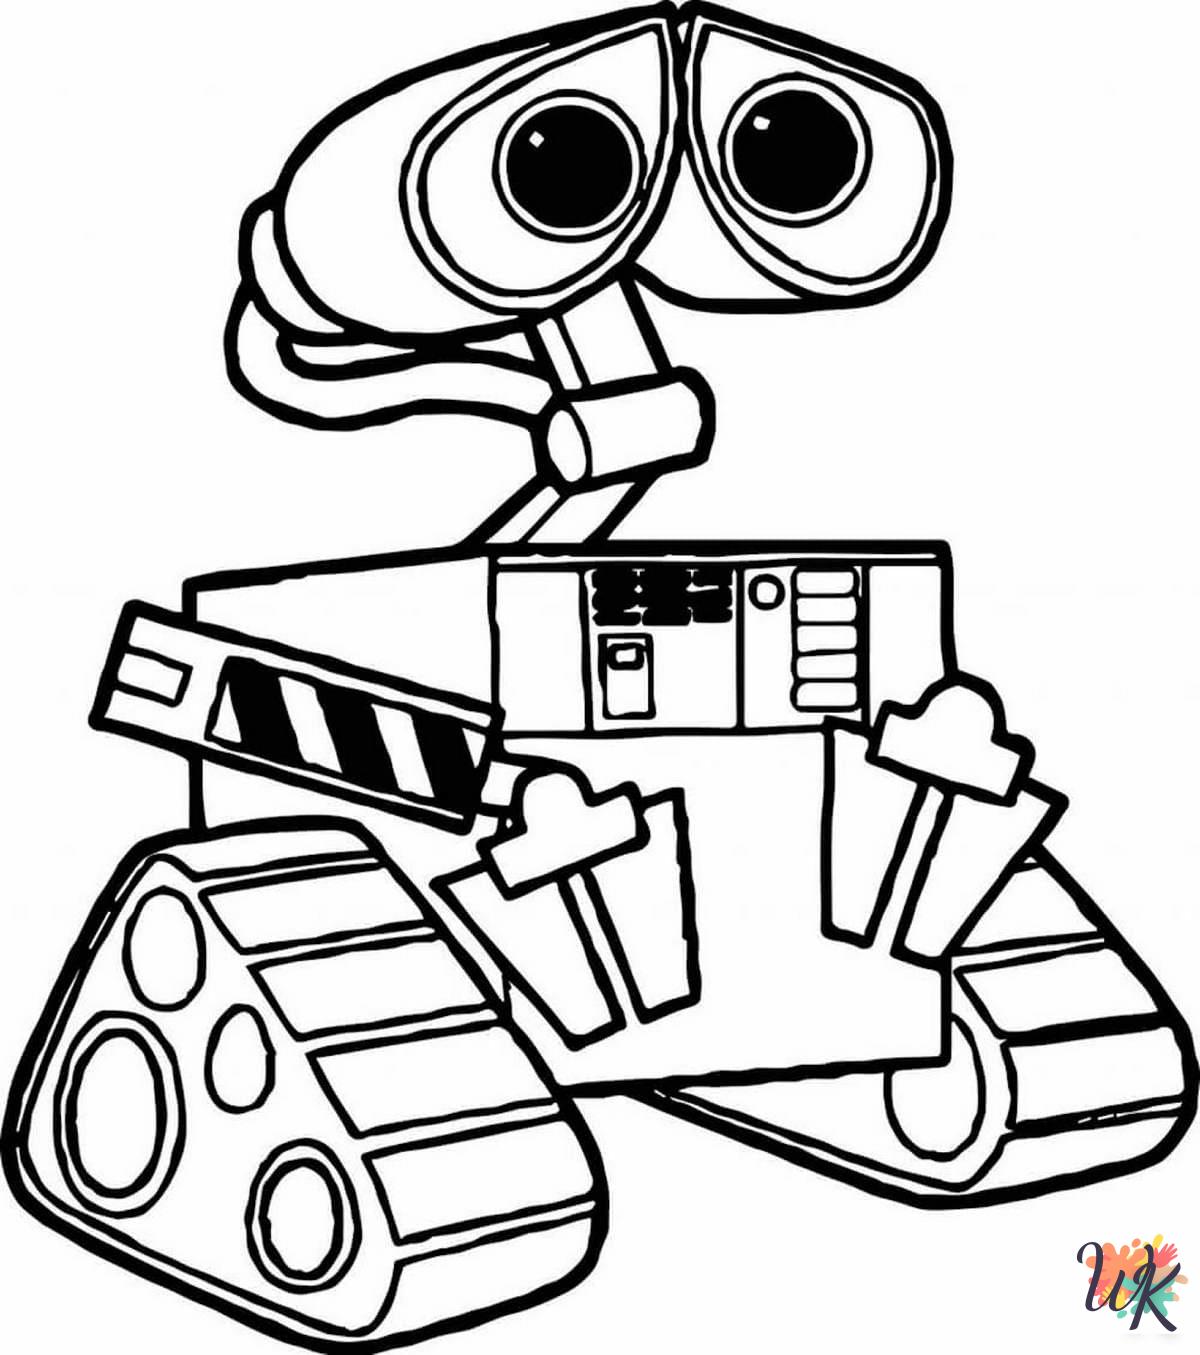 WALL-E coloring pages for adults easy 4